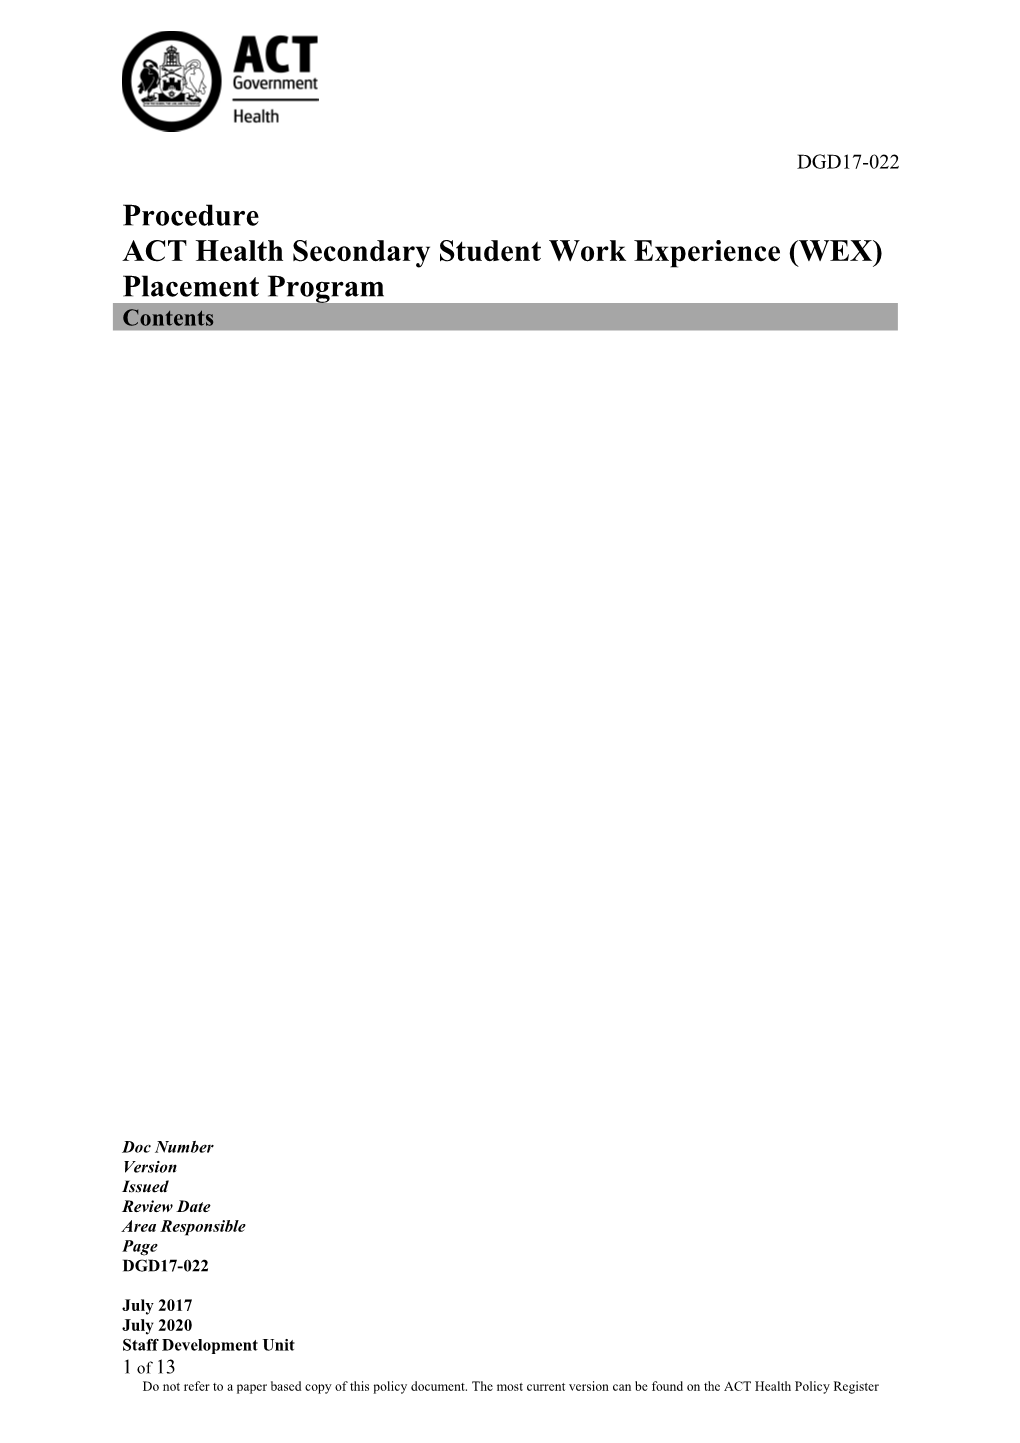 ACT Health Secondary Student Work Experience (WEX) Placement Program Procedure